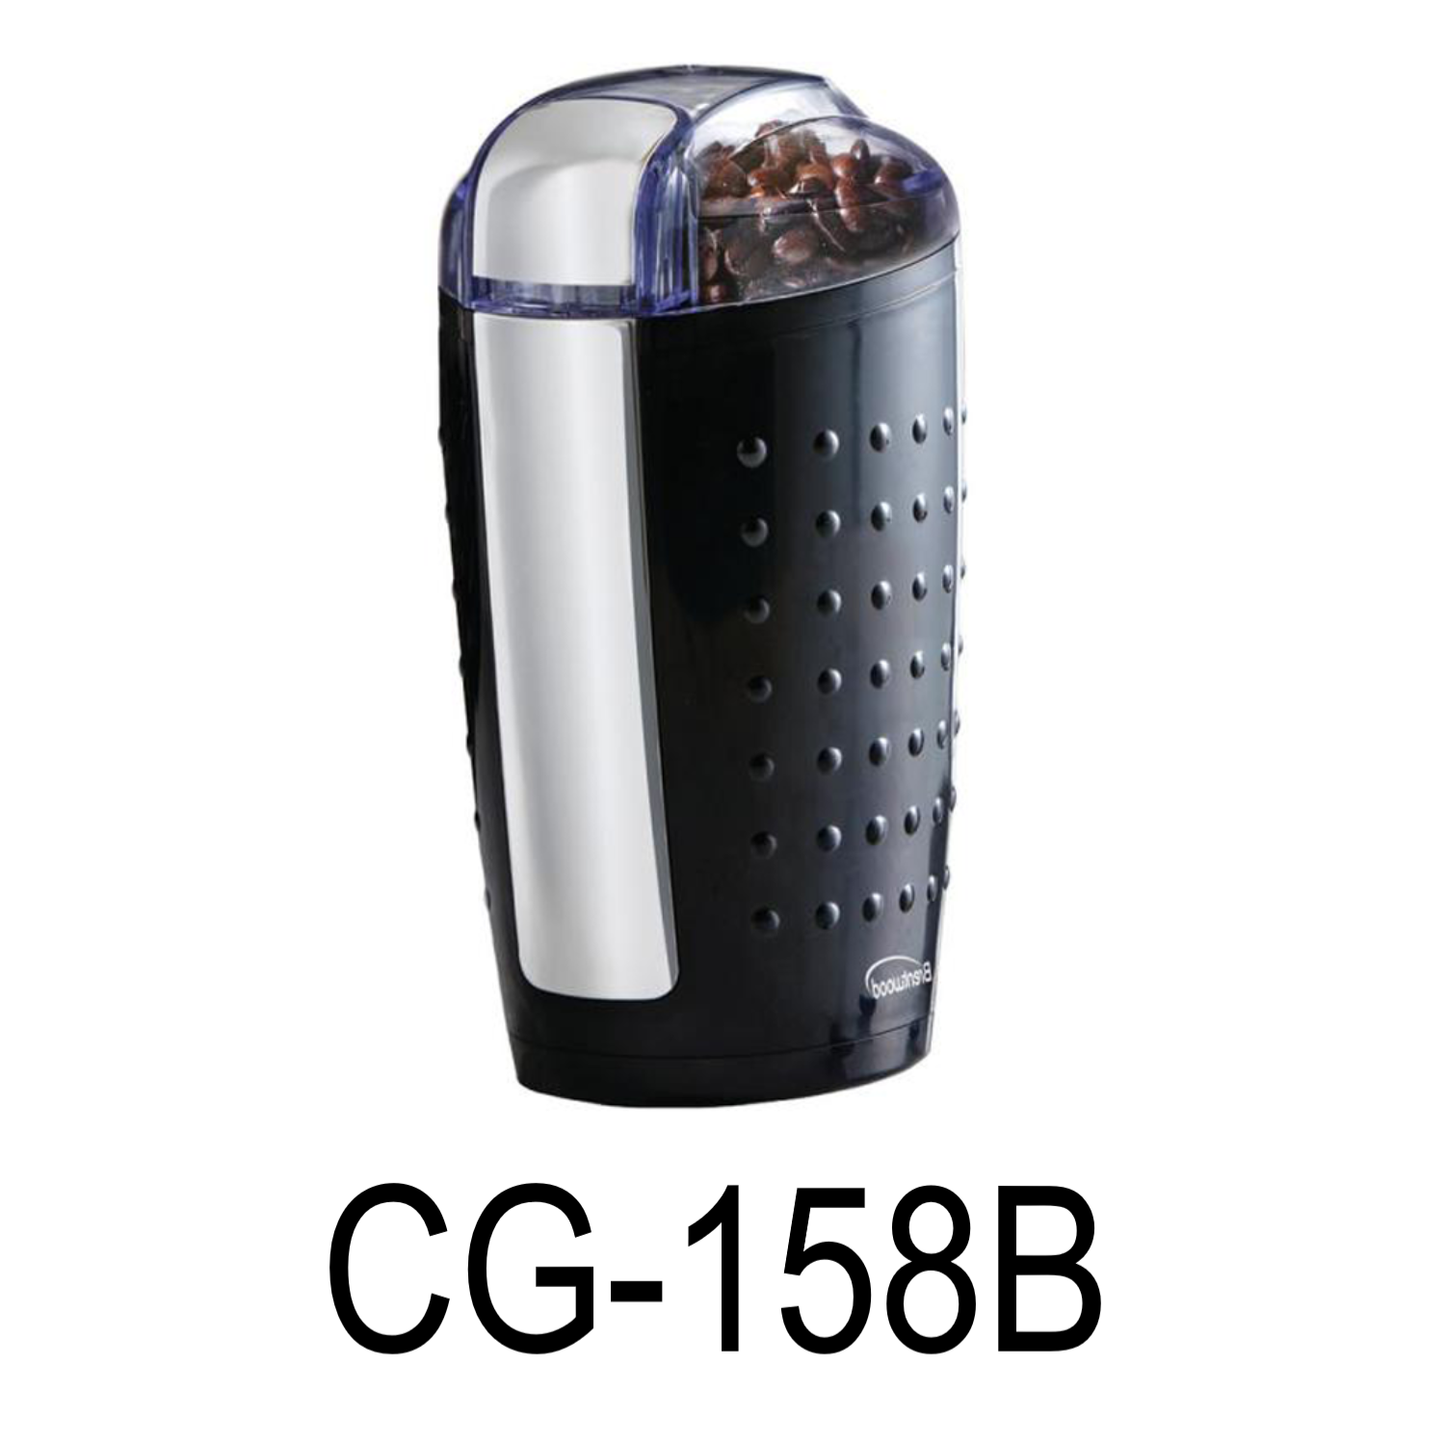 4oz Coffee and Spice Grinder (BLACK)